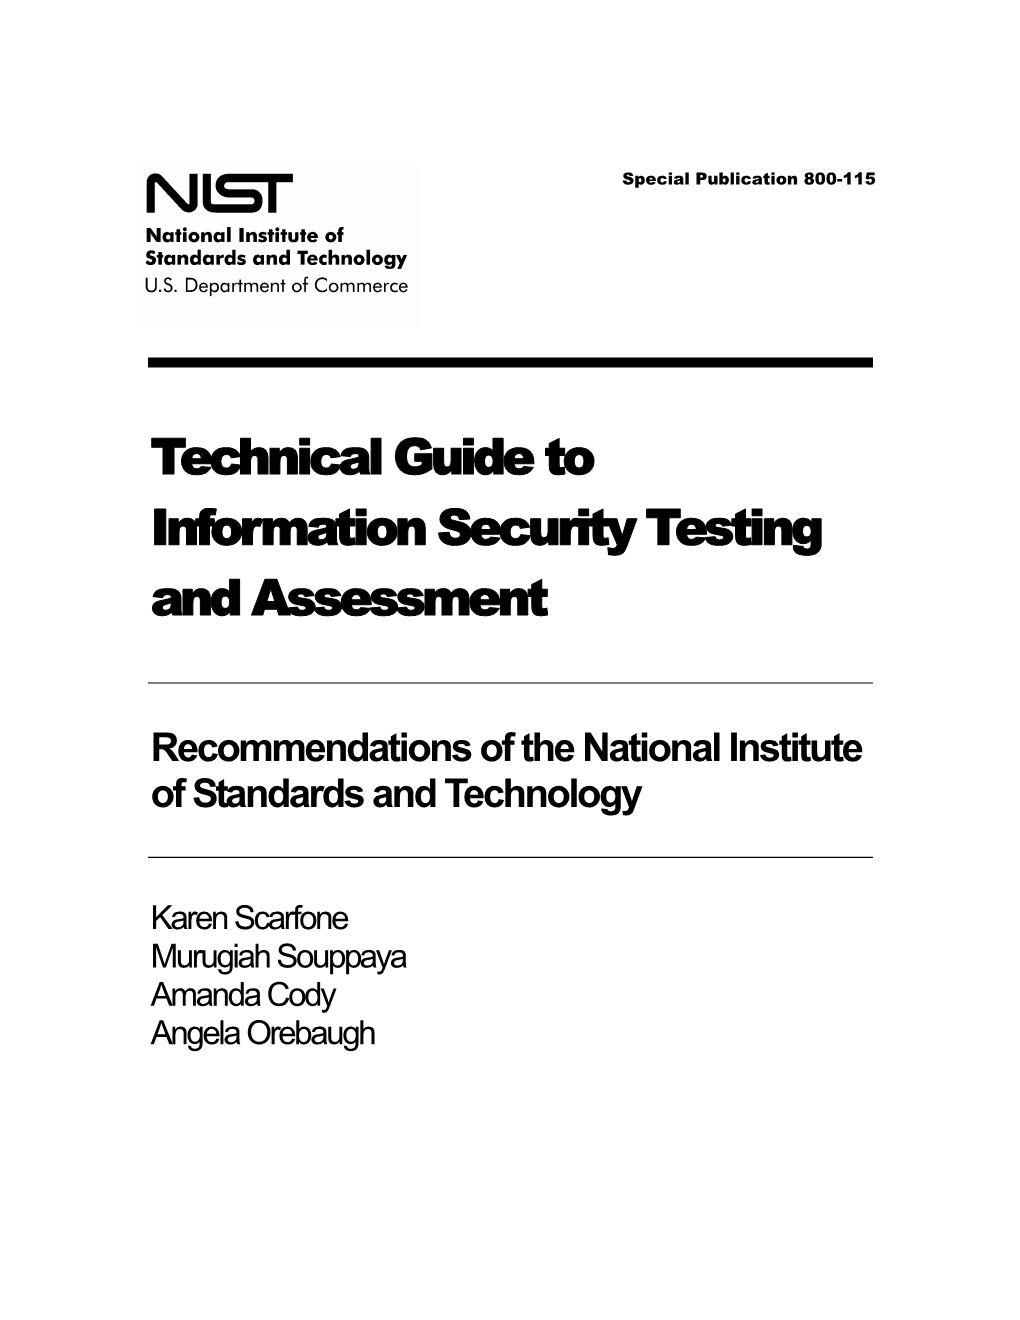 NIST SP 800-115, Technical Guide to Information Security Testing and Assessment